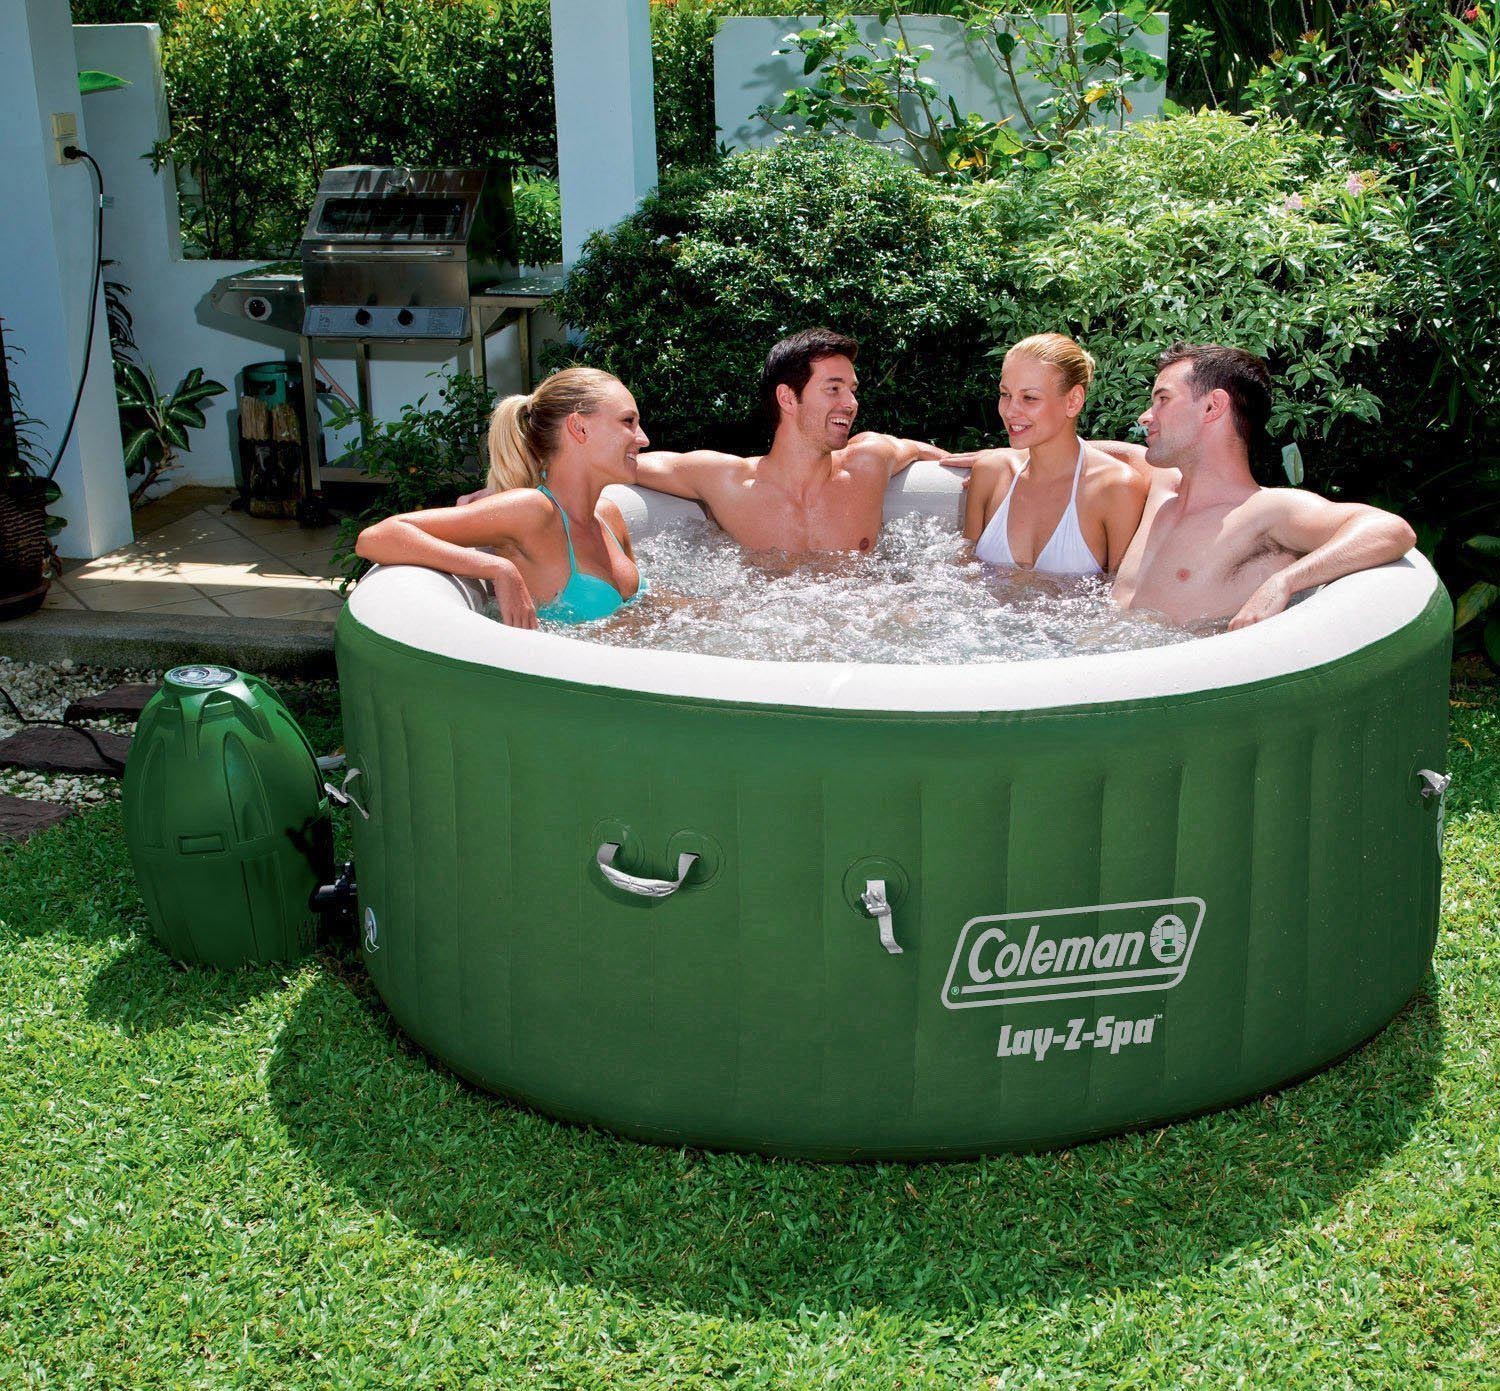 Cheap Outdoor Jacuzzi Hot Tubs